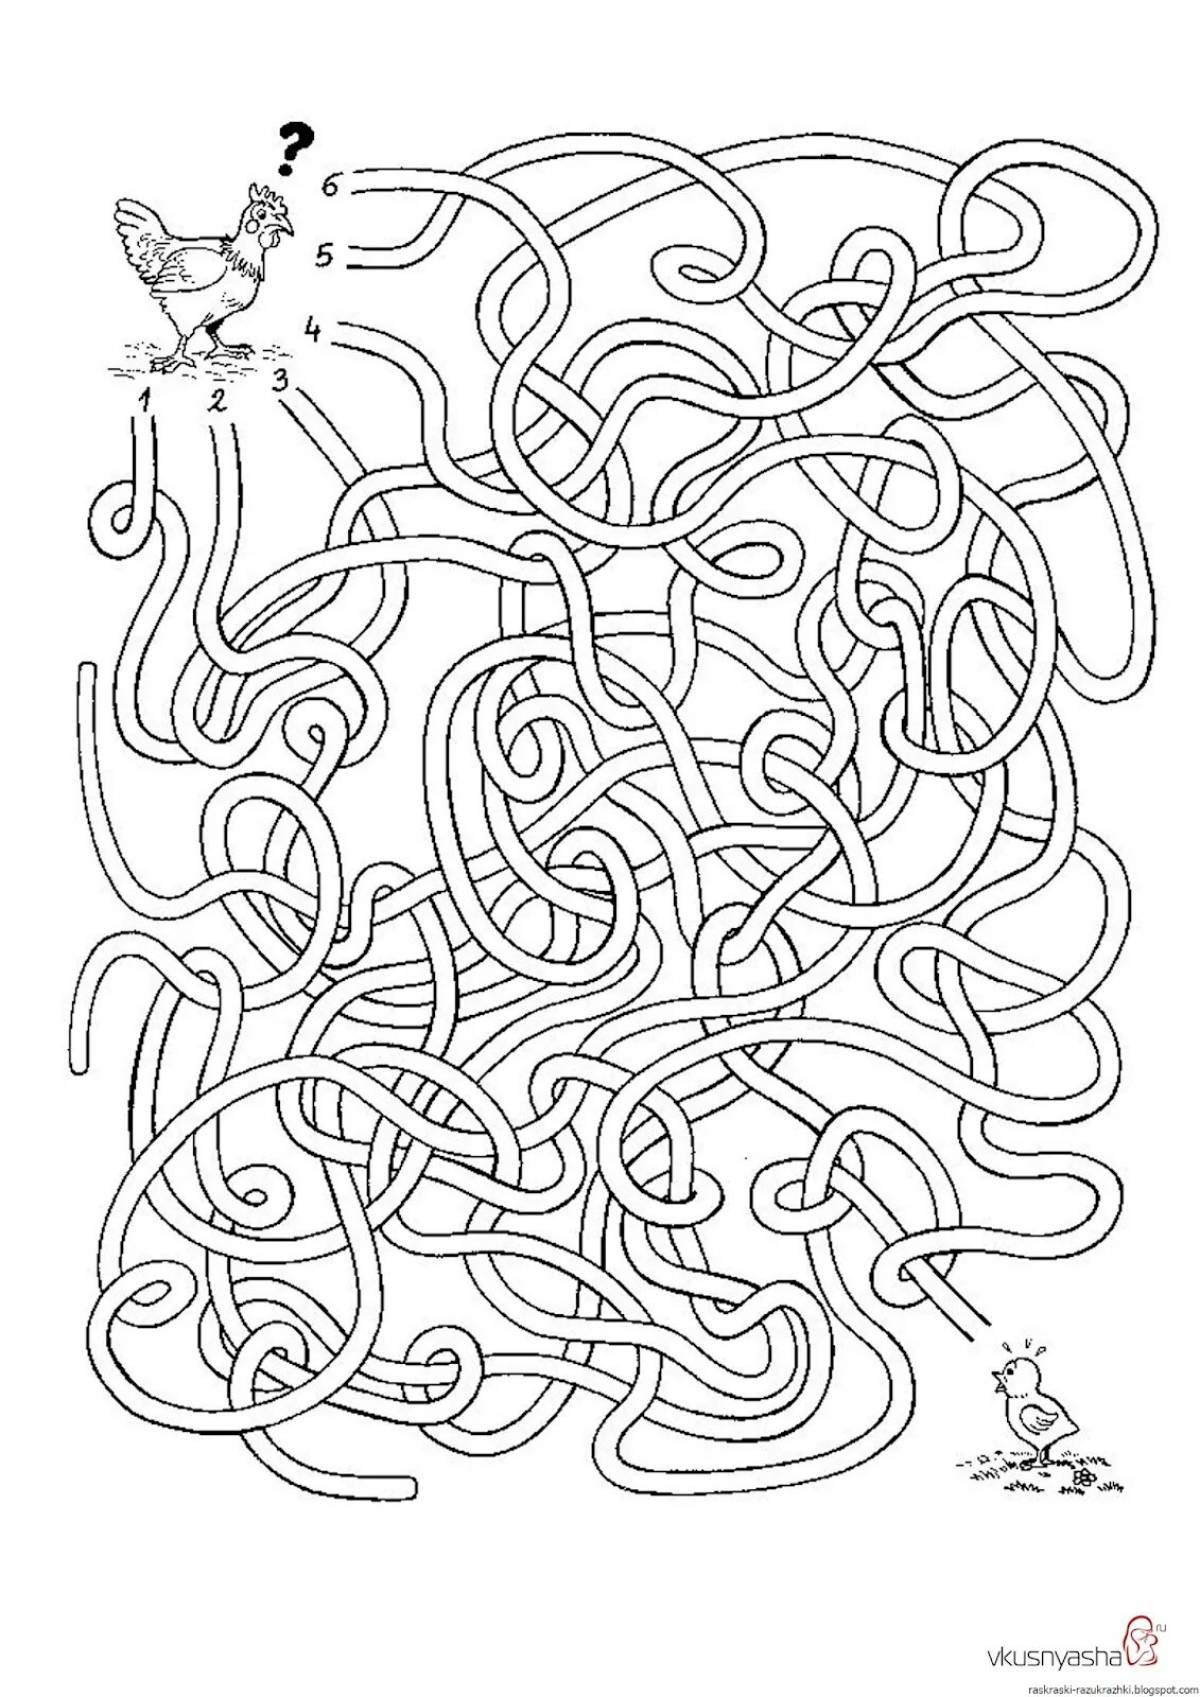 Coloring exotic labyrinth for children 7 years old